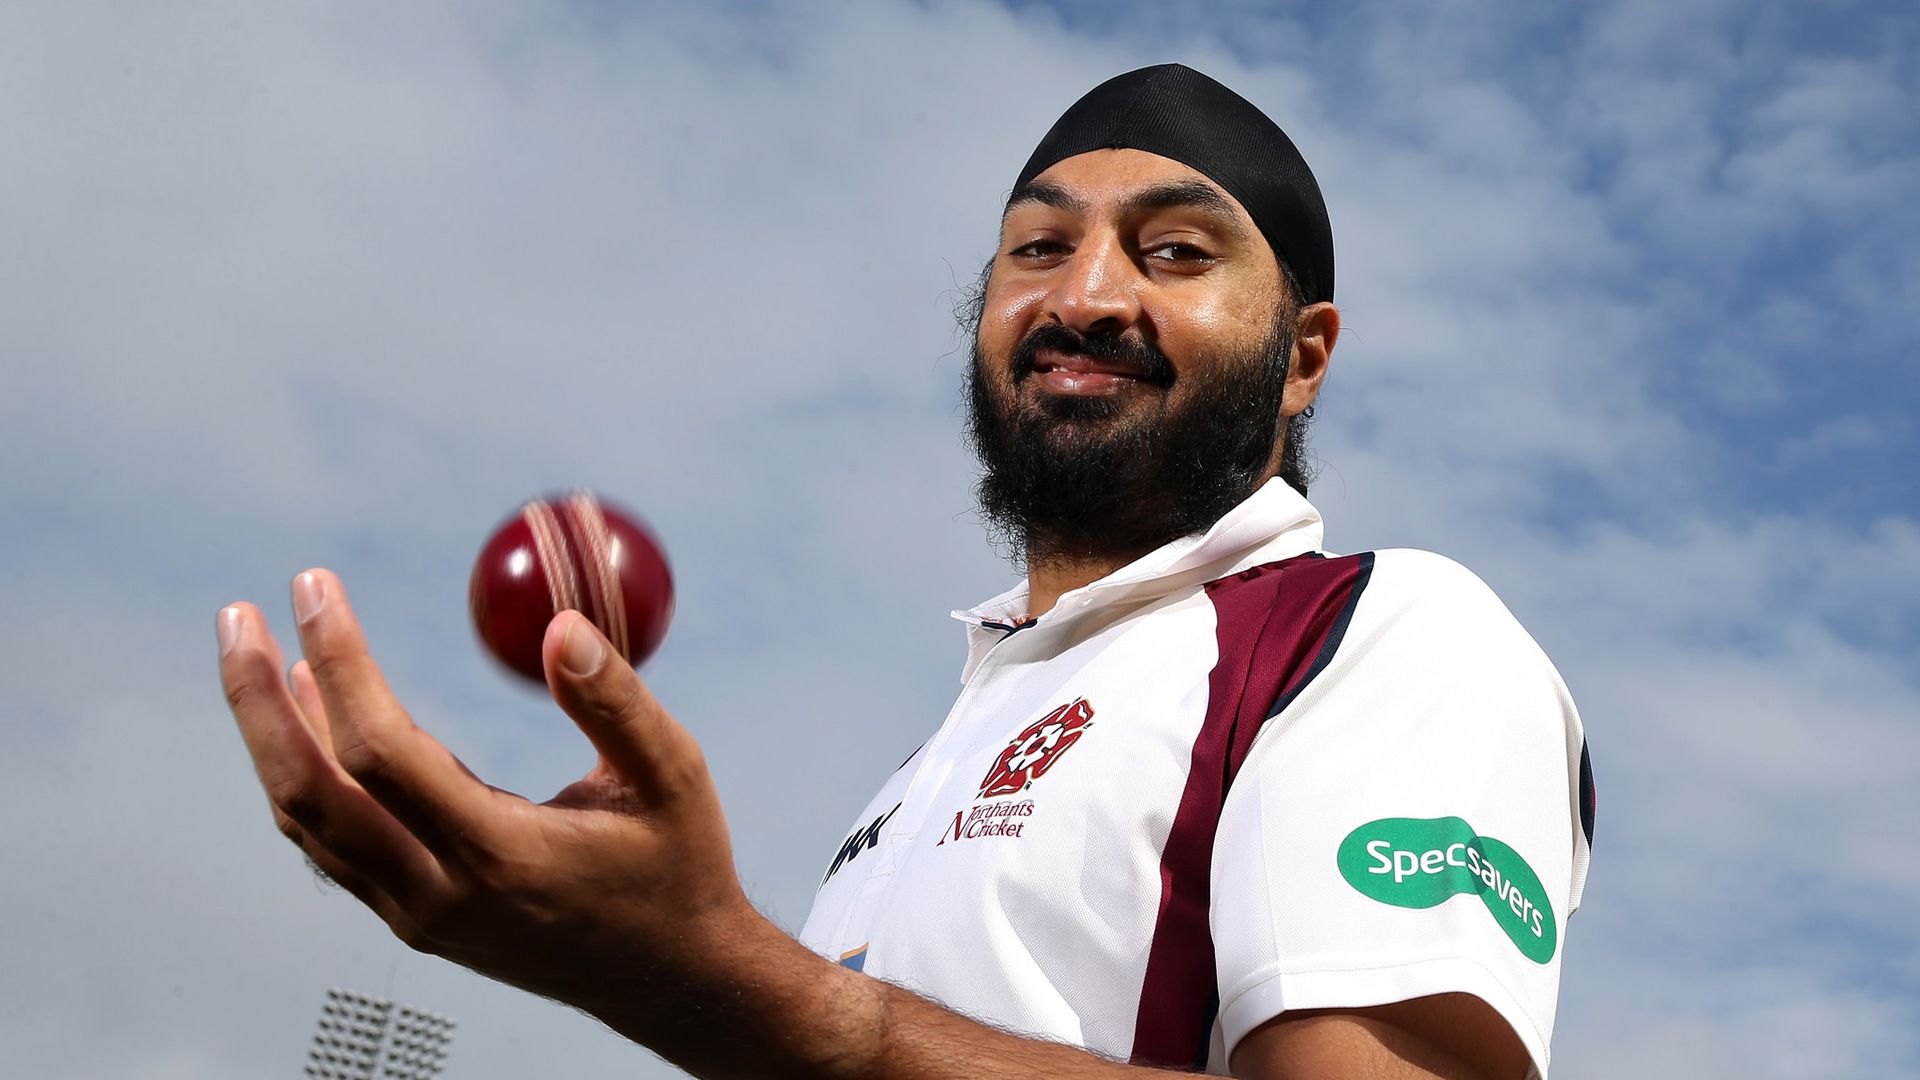 'I want to be PM': Ex-England cricketer Monty Panesar standing to become MP